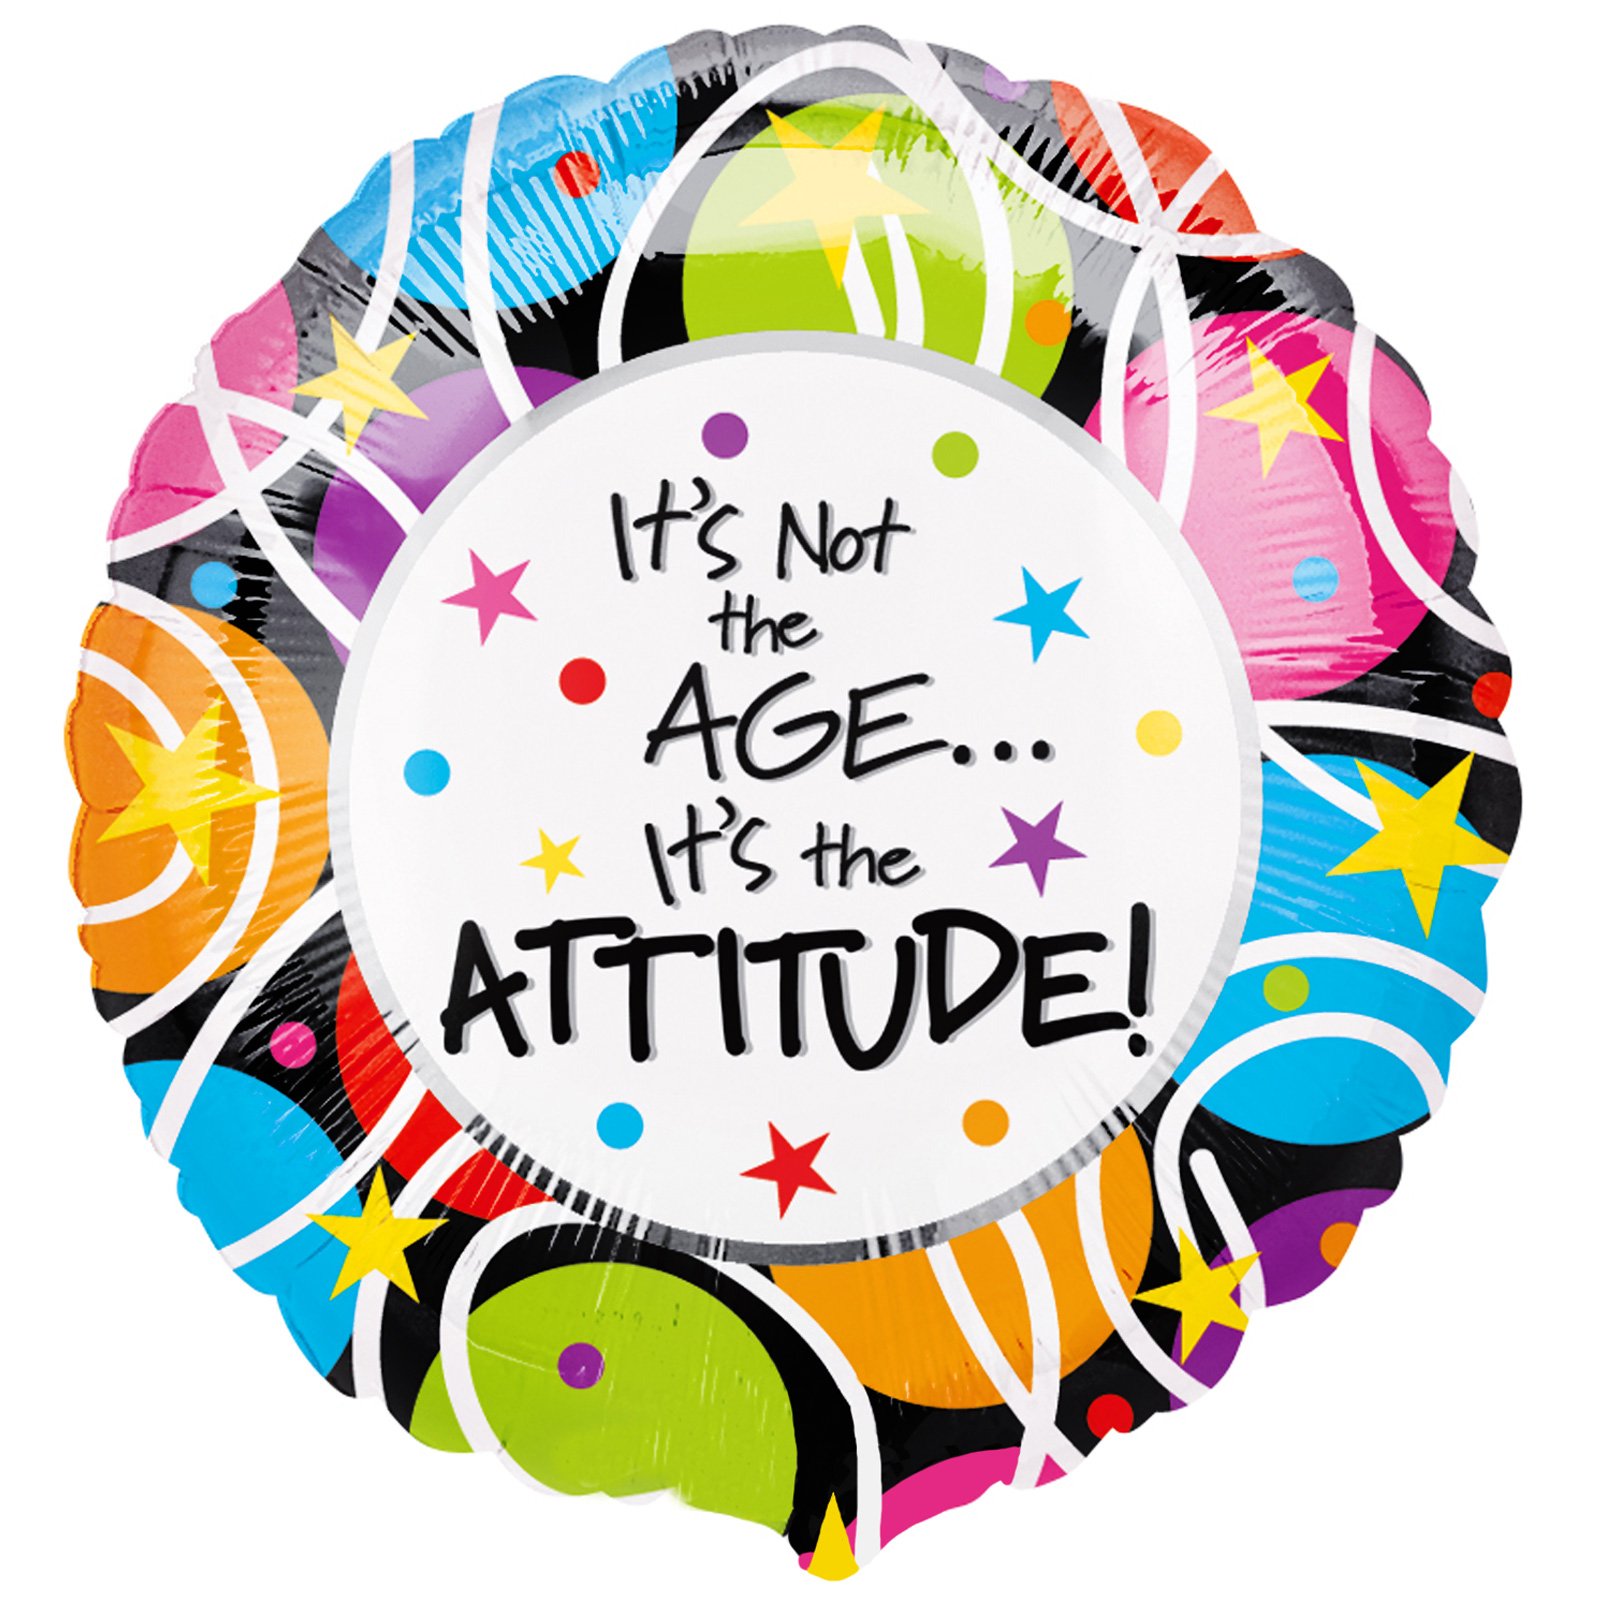 Its age. Its not about age its about attitude.